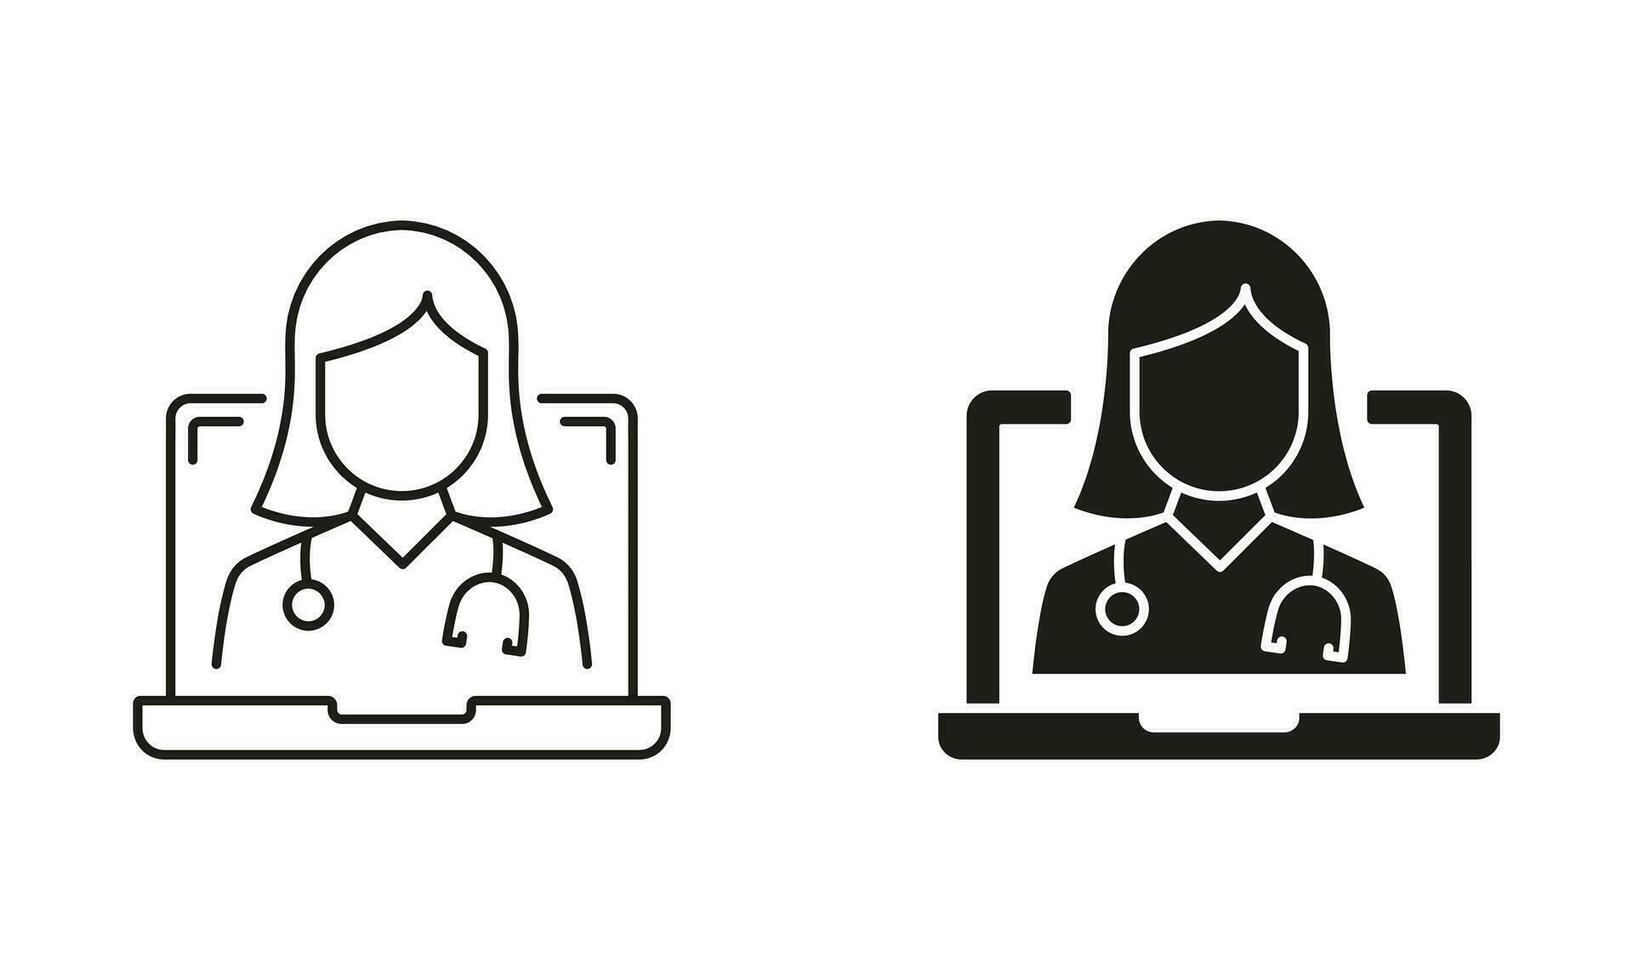 Online Digital Medicine Line and Silhouette Icon Set. Online Remote Healthcare Pictogram. Virtual Medical Service, Telemedicine Symbol Collection. Doctor in Computer. Isolated Vector Illustration.